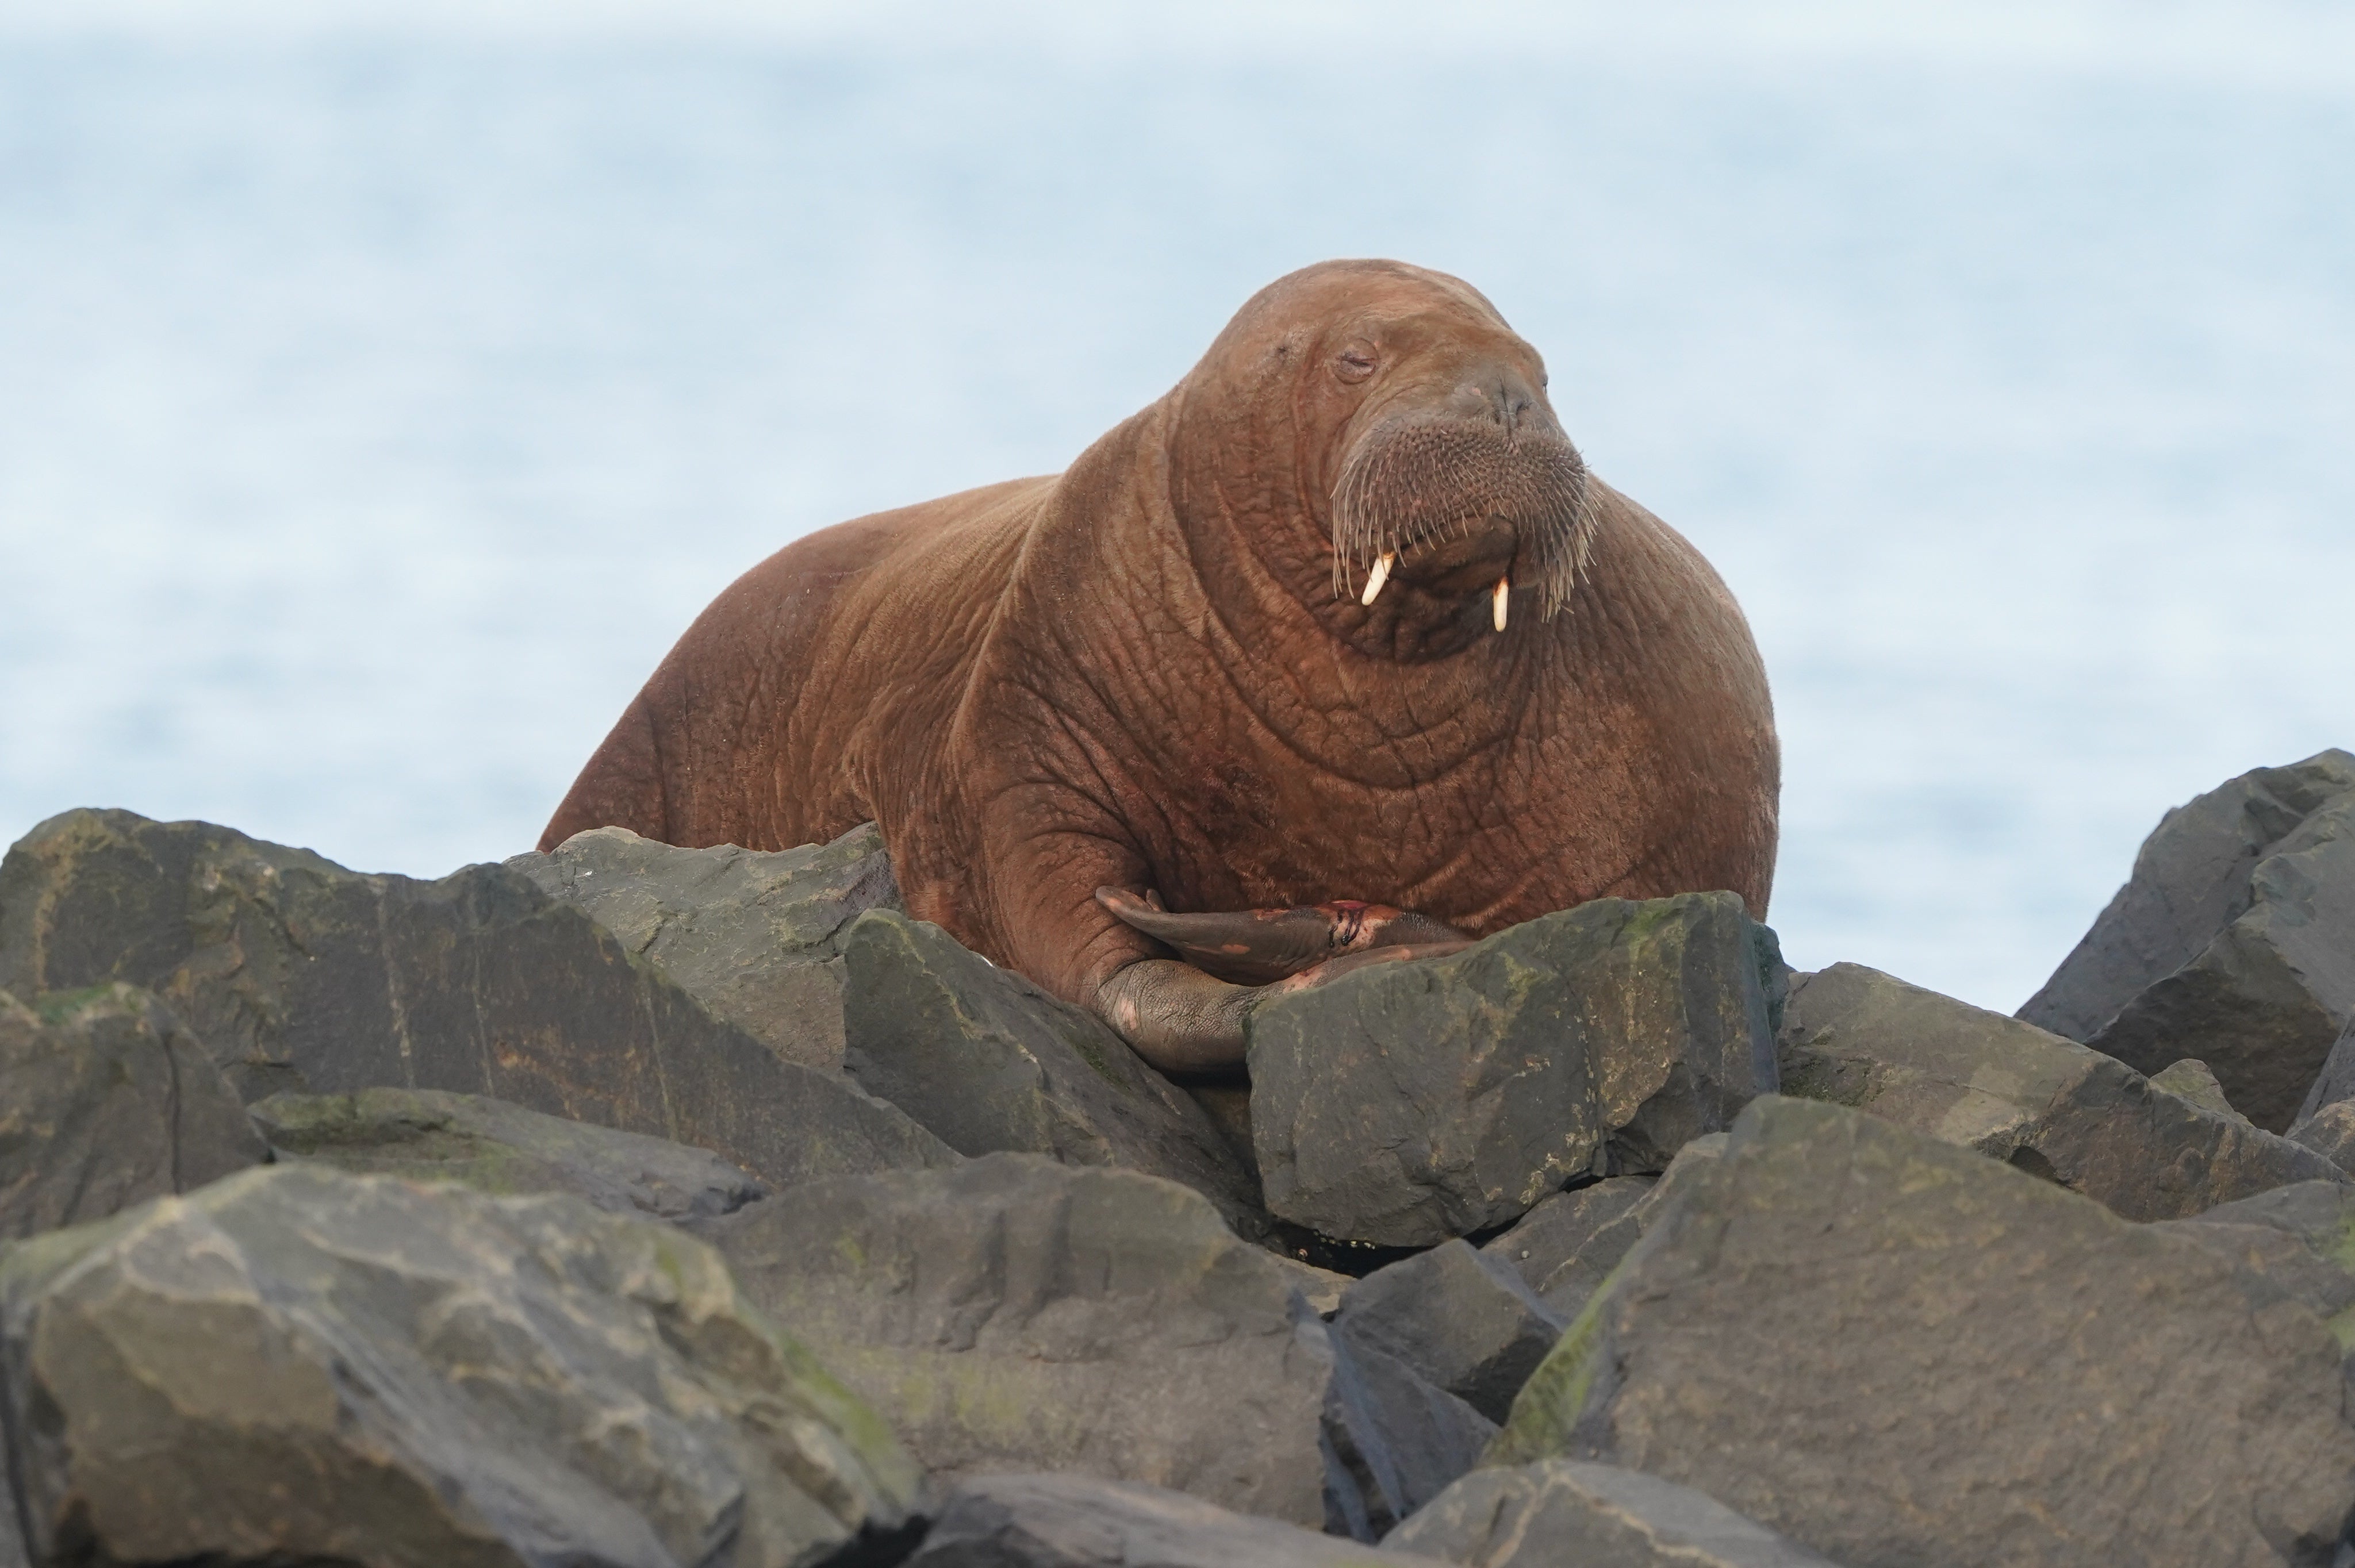 The walrus, believed to be a juvenile female, was seen relaxing on rocks in Seahouses harbour